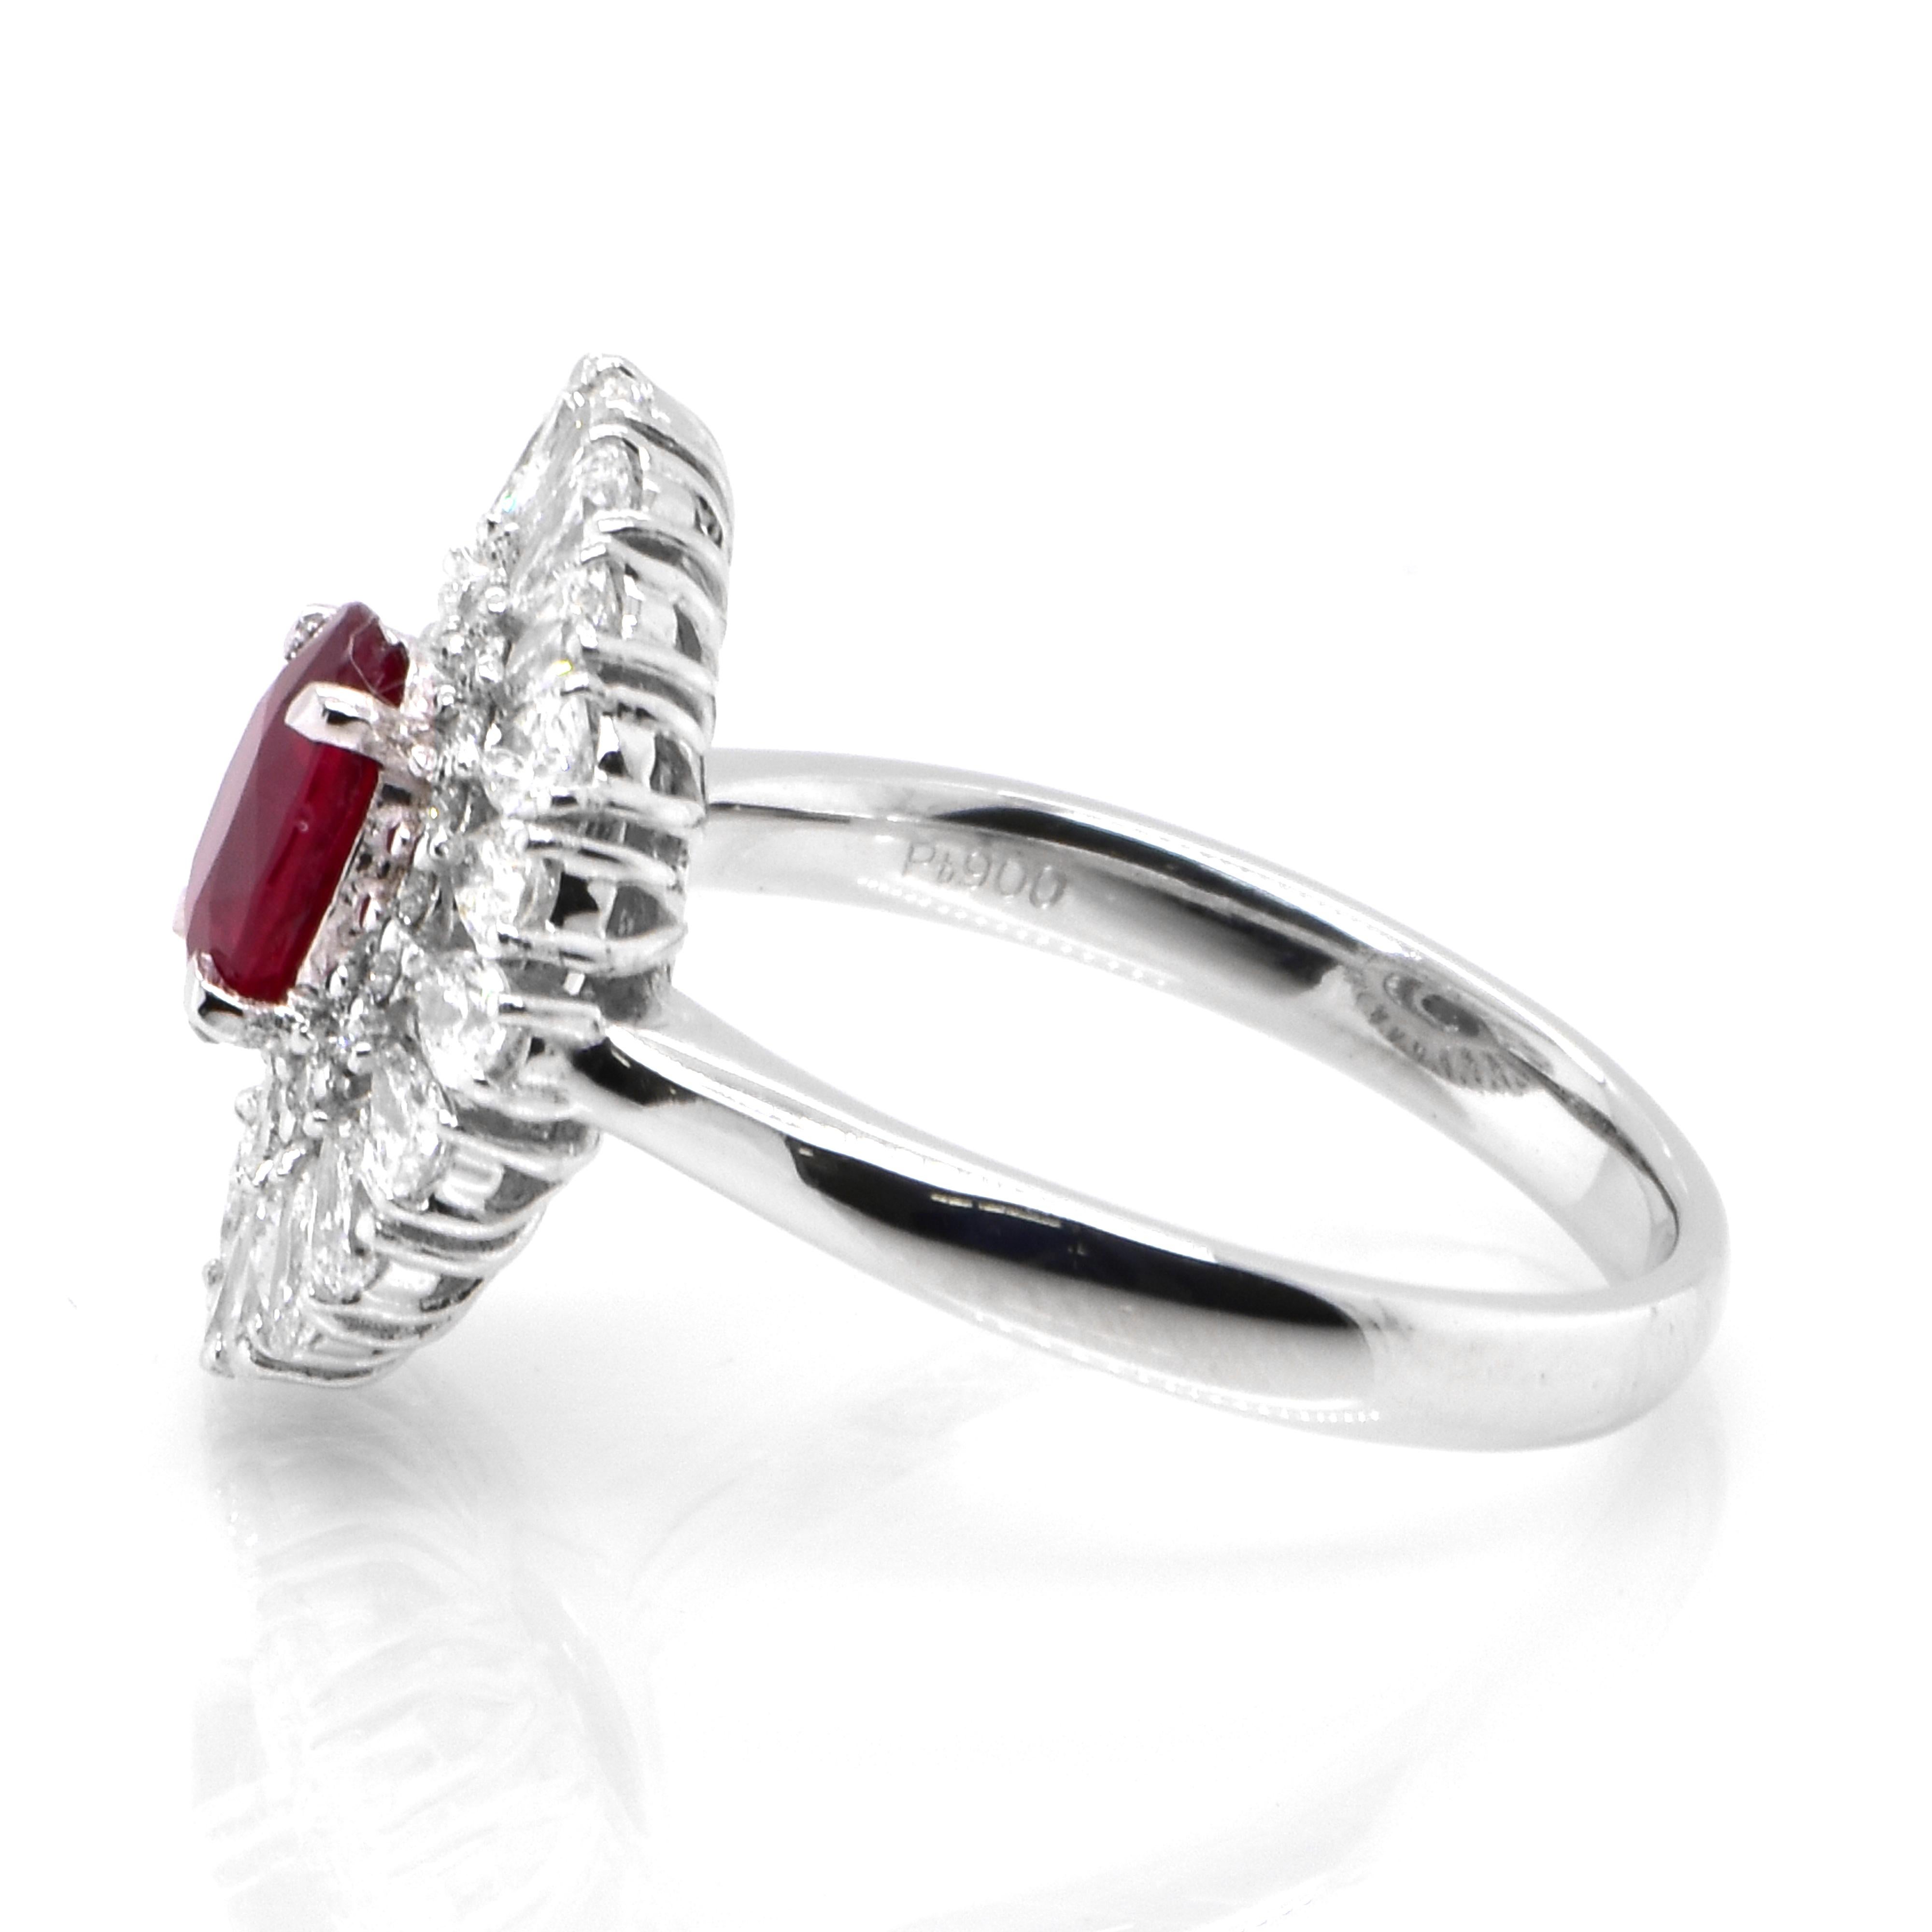 Oval Cut GIA Certified 1.01 Carat, Pigeon Blood Red, Burmese Ruby Ring Made in Platinum For Sale